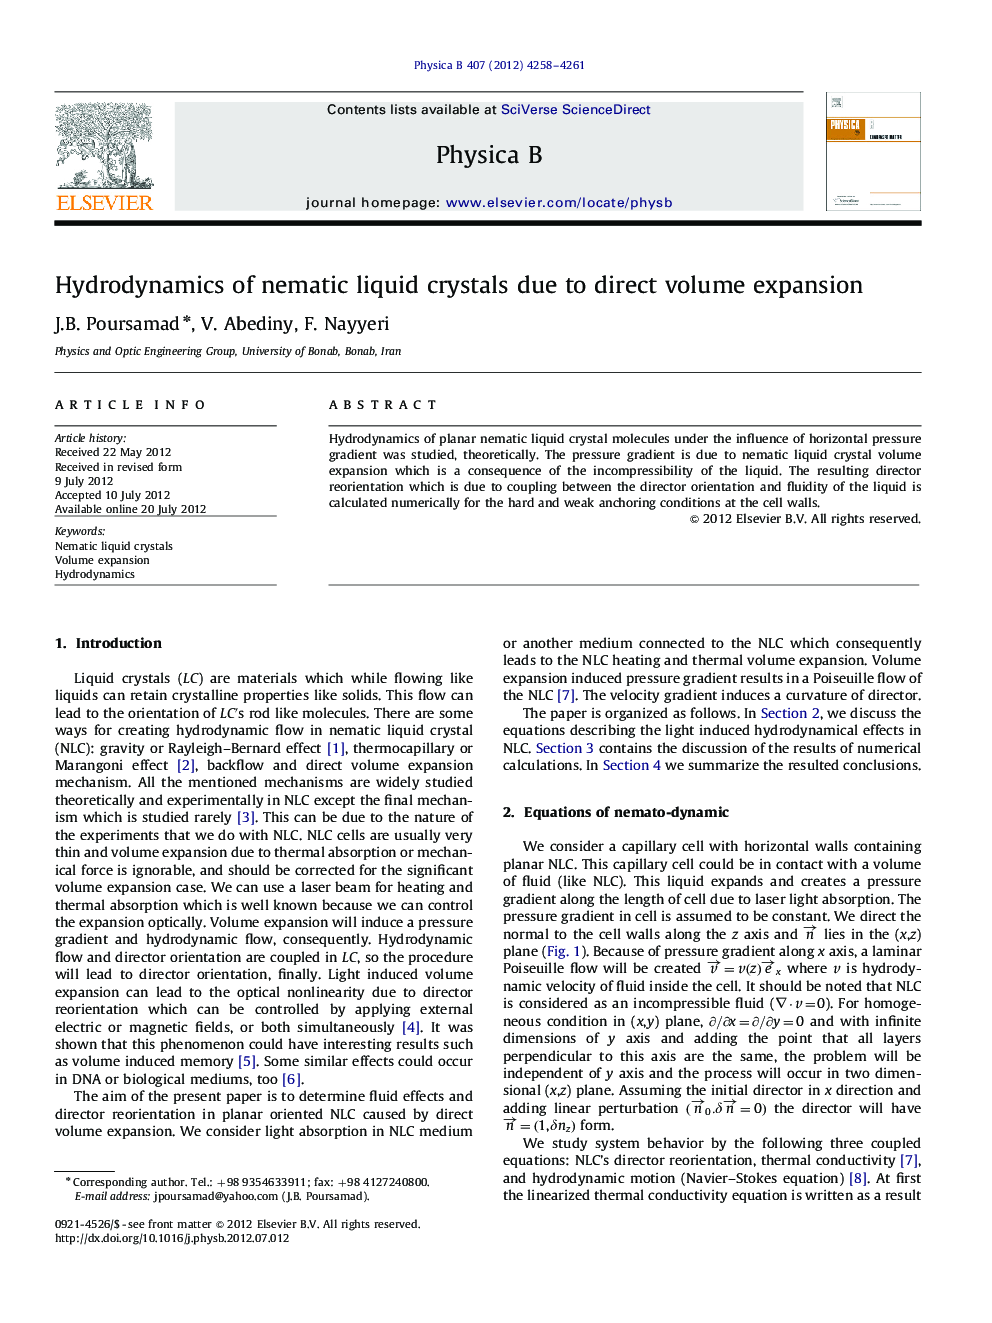 Hydrodynamics of nematic liquid crystals due to direct volume expansion